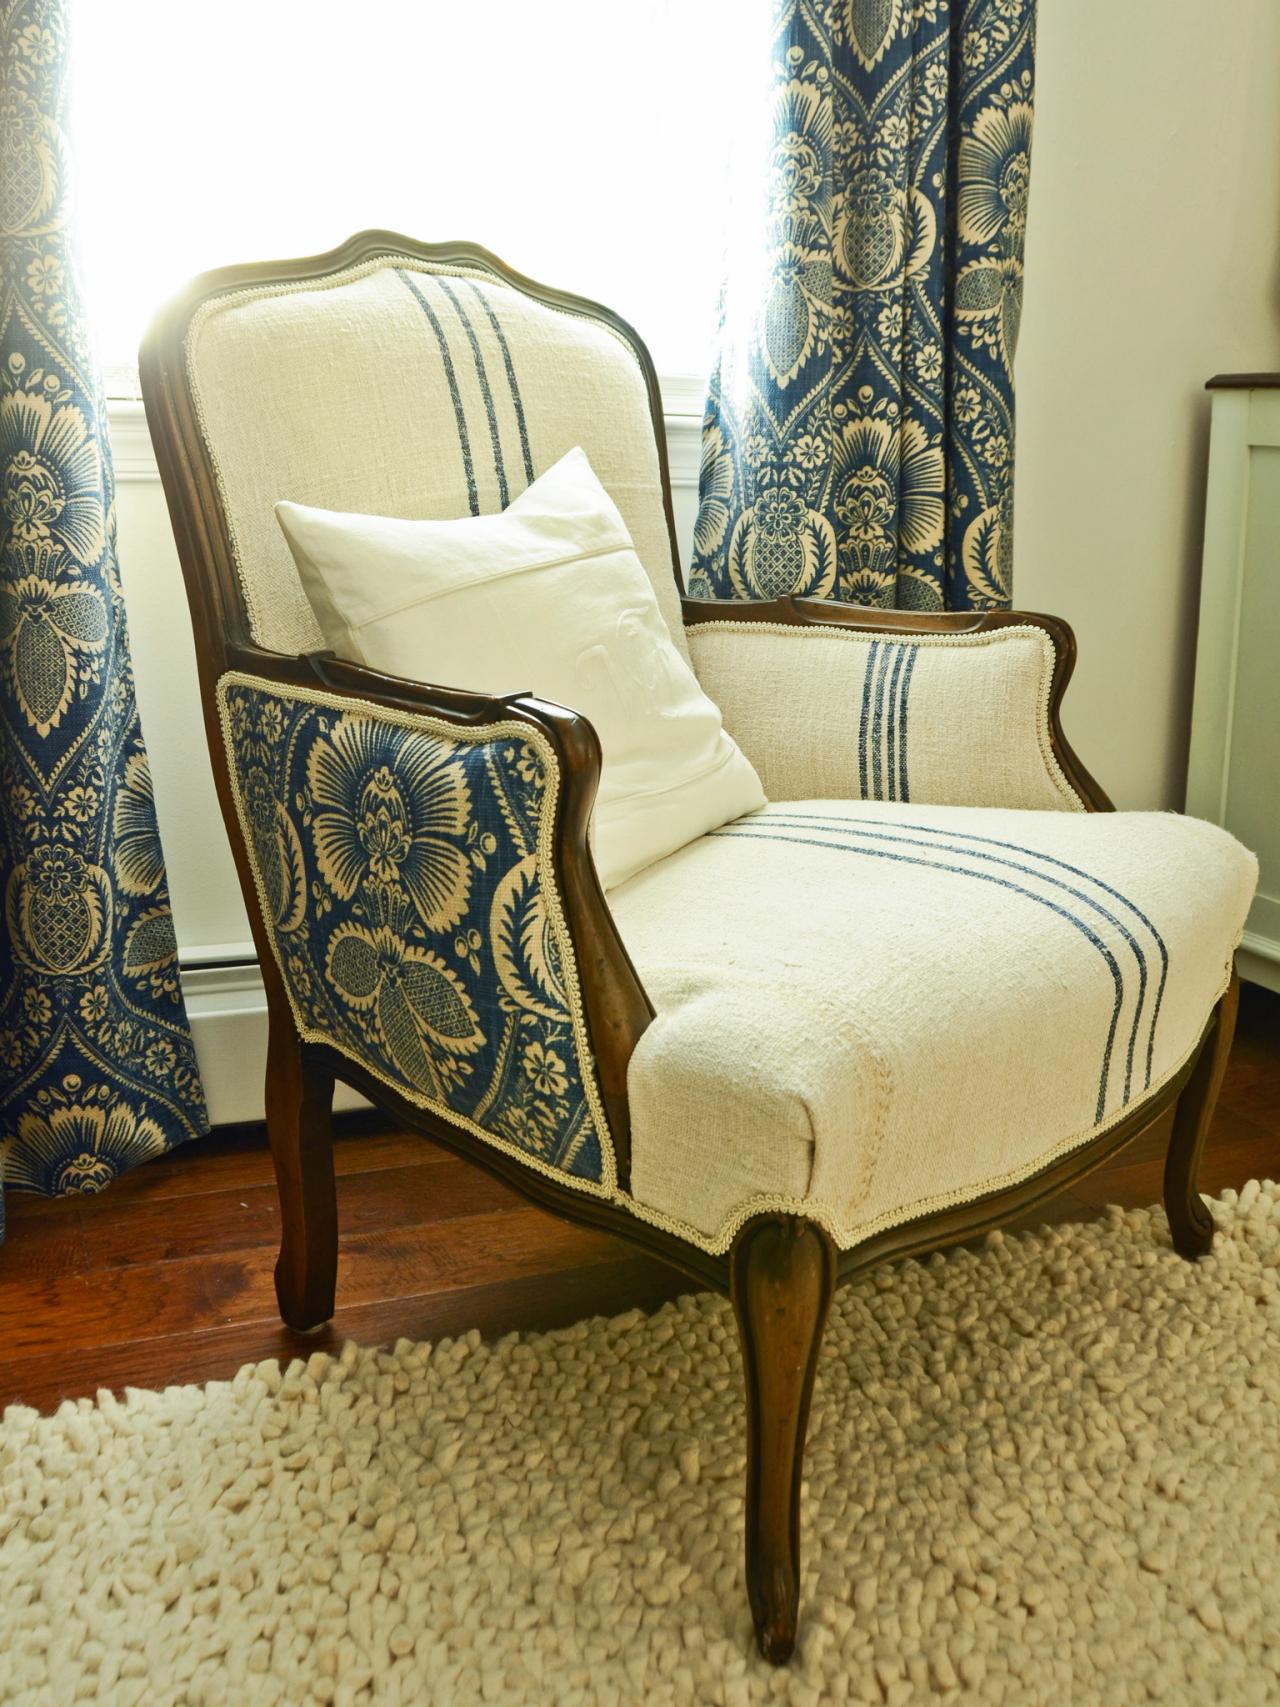 How To Reupholster An Arm Chair, How To Make Upholstered Chair